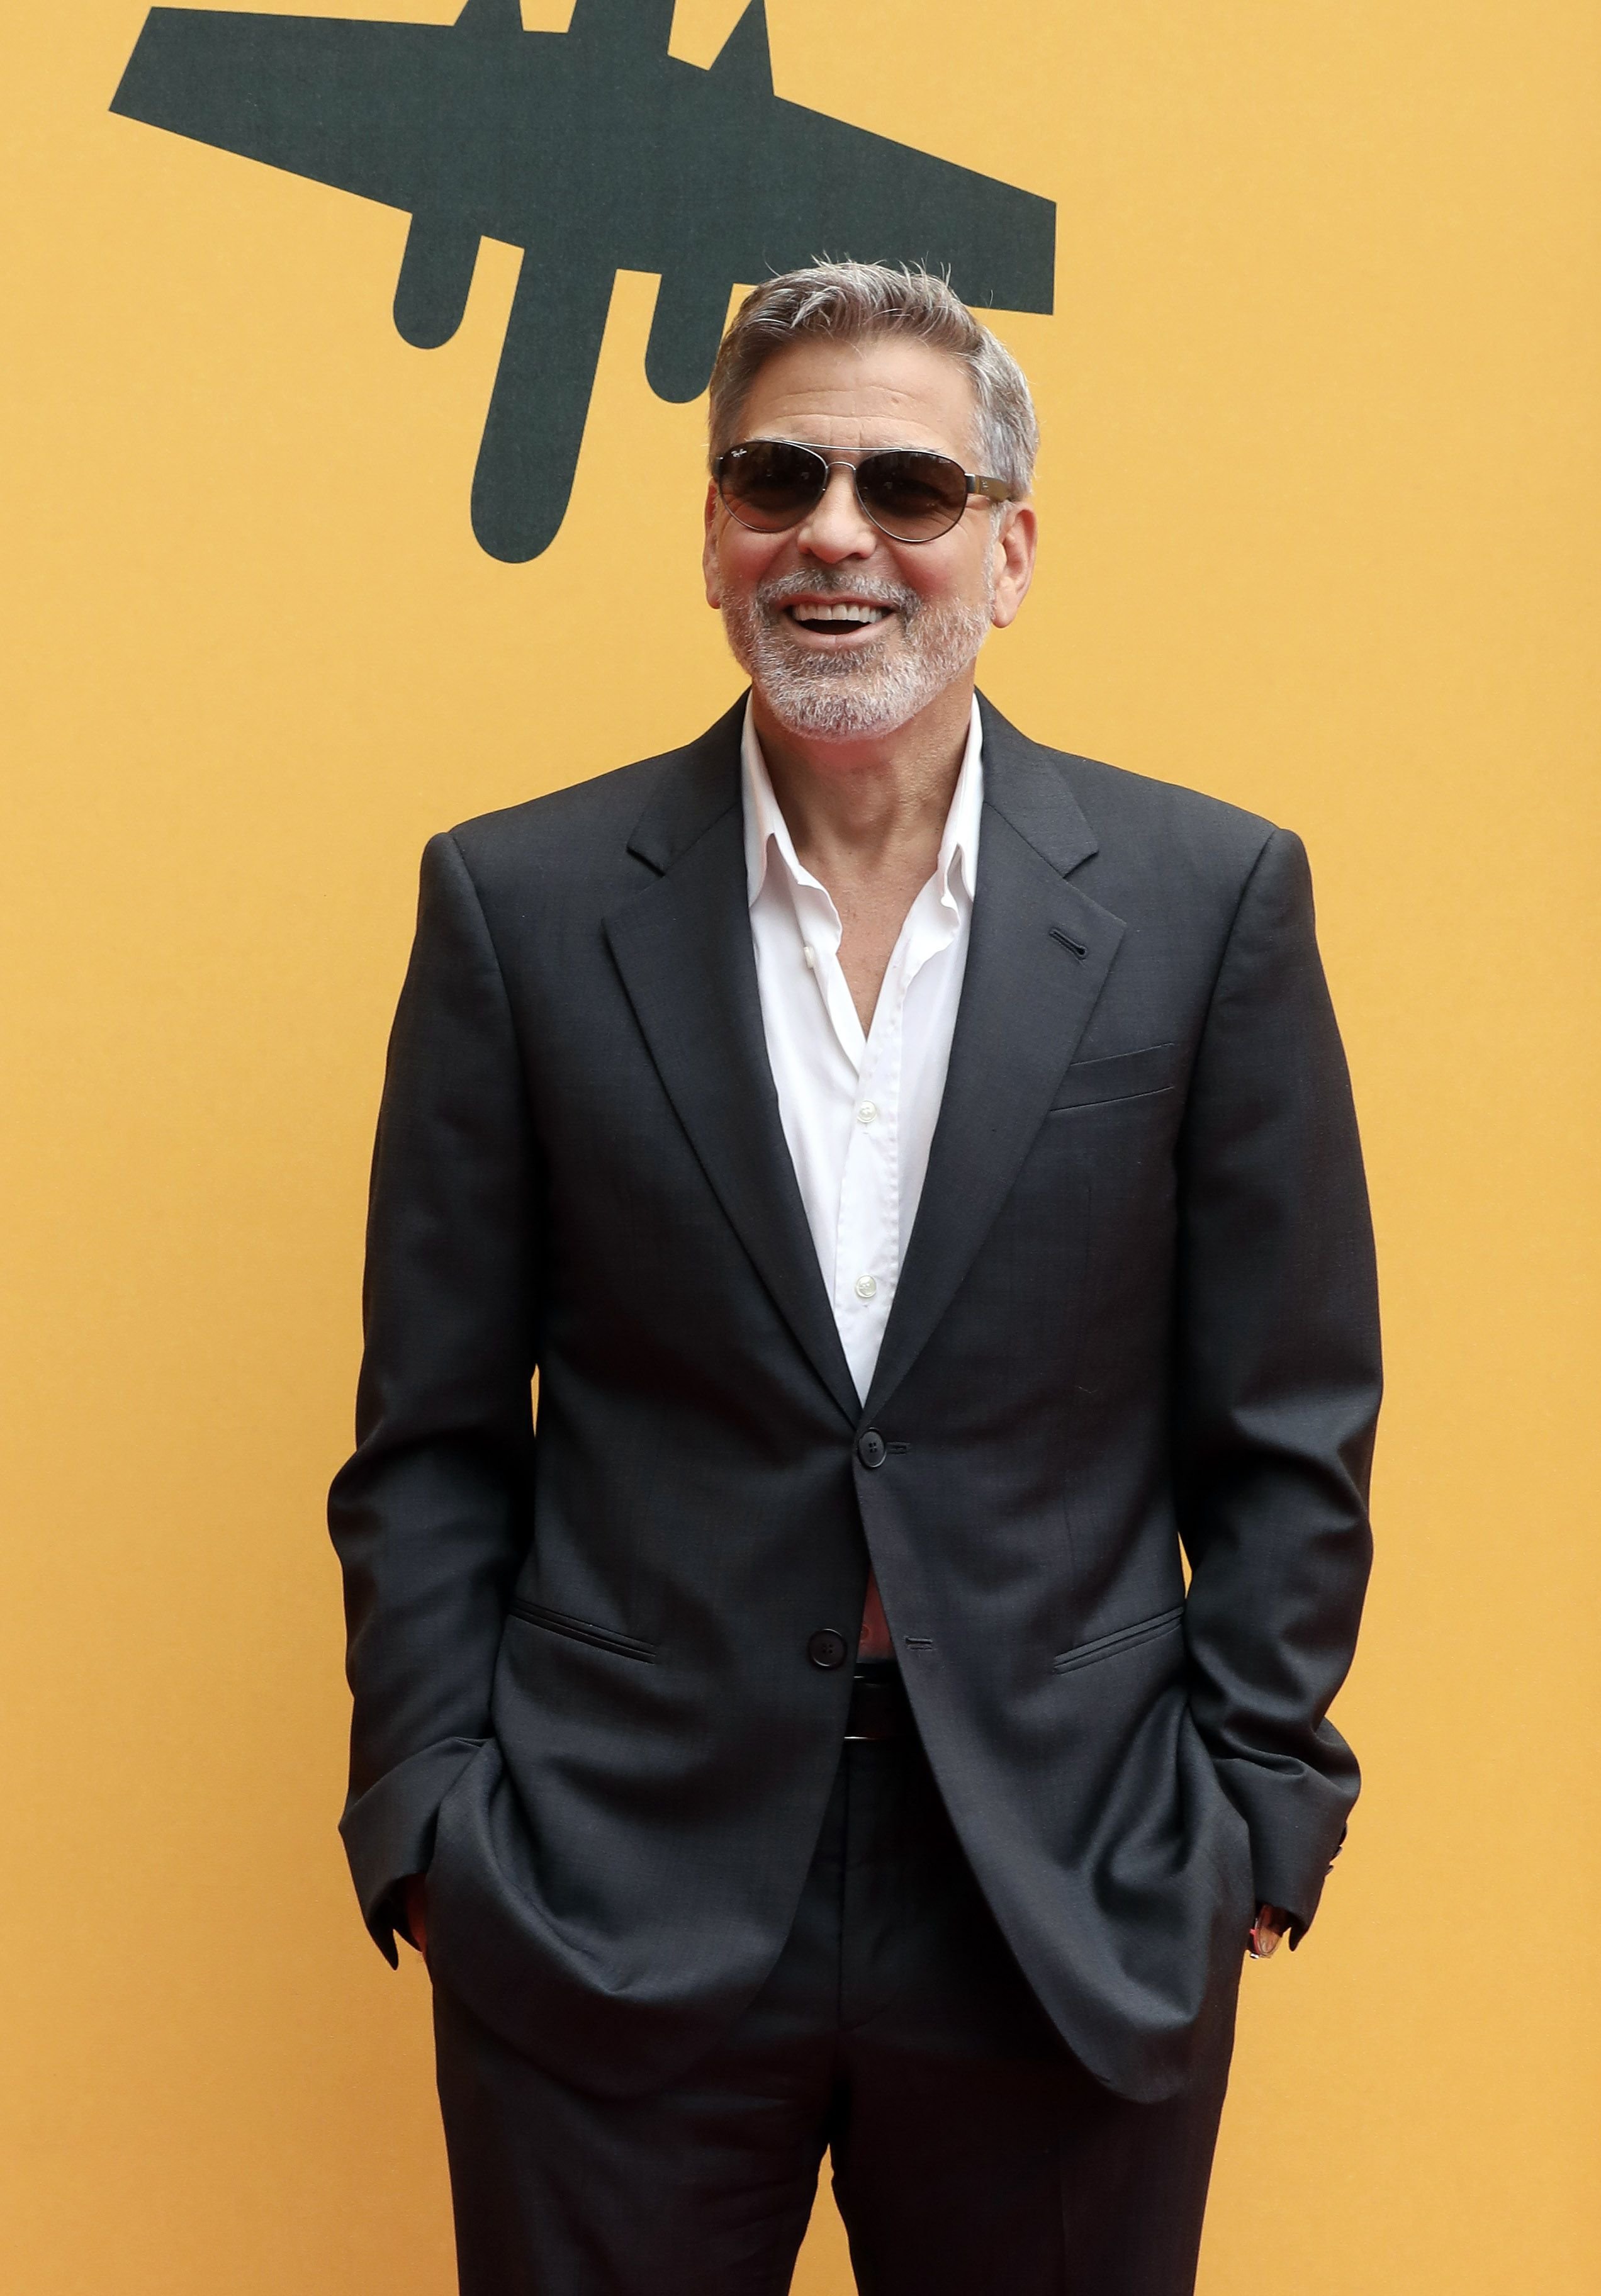 George Clooney at 'Catch-22' Photocall at The Space Moderno Cinema on May 13, 2019 | Photo: Getty Images